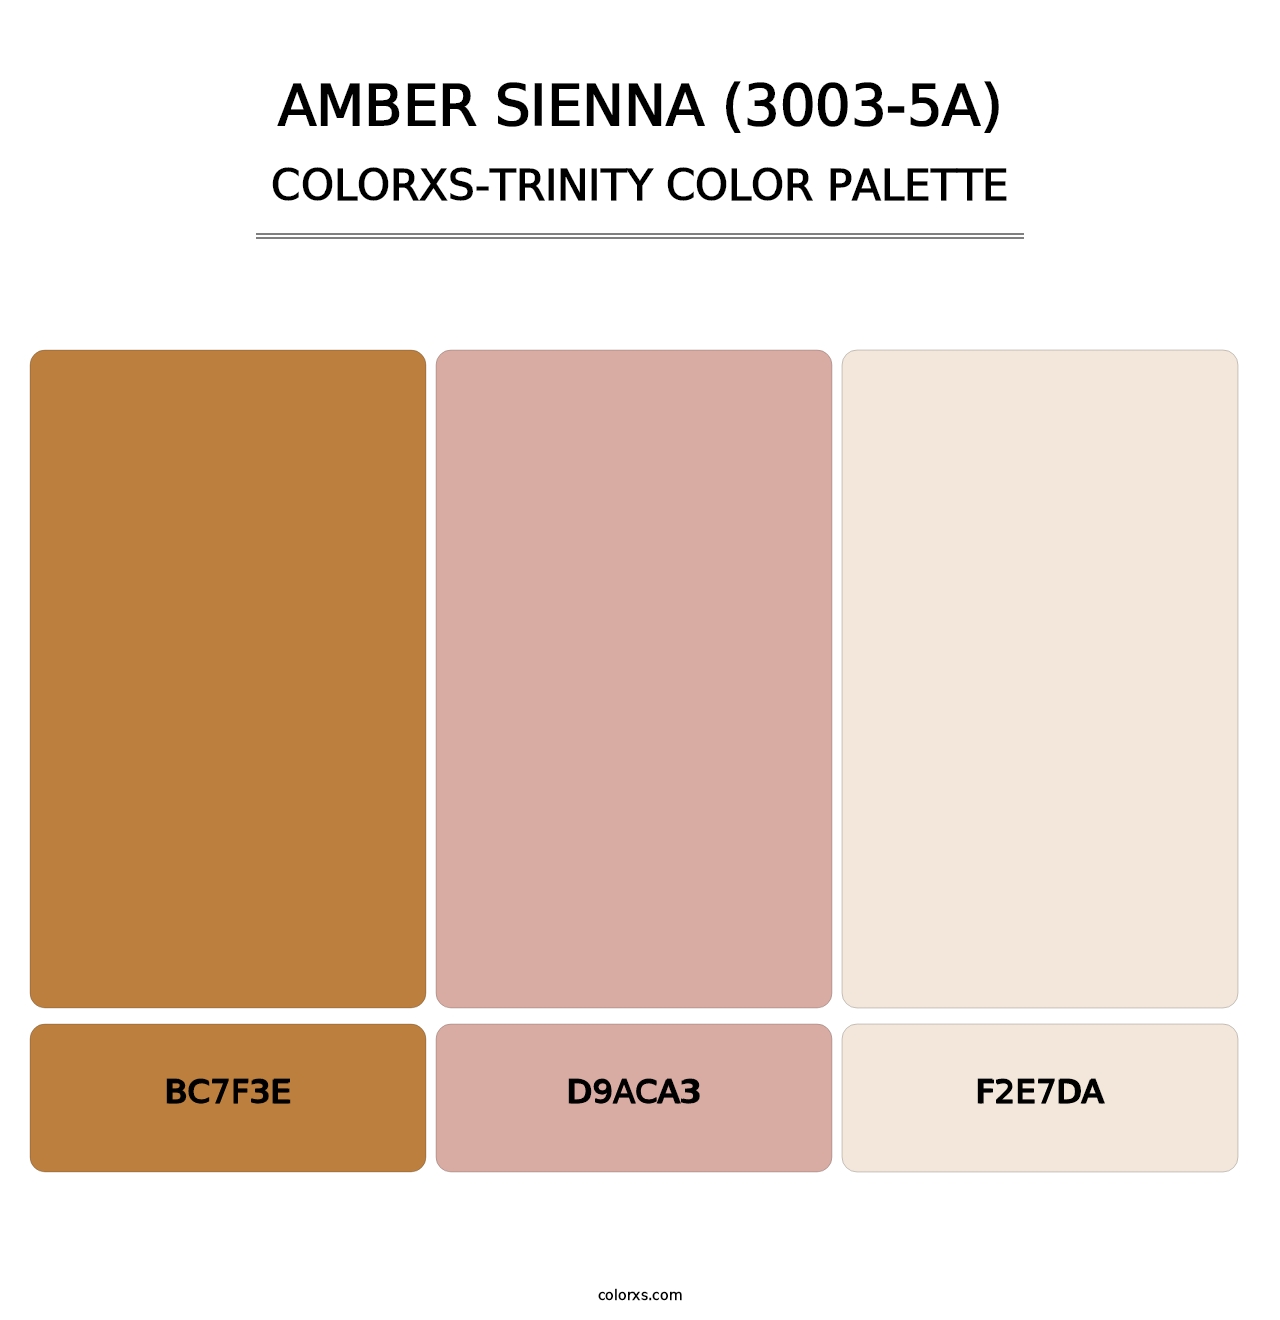 Amber Sienna (3003-5A) - Colorxs Trinity Palette